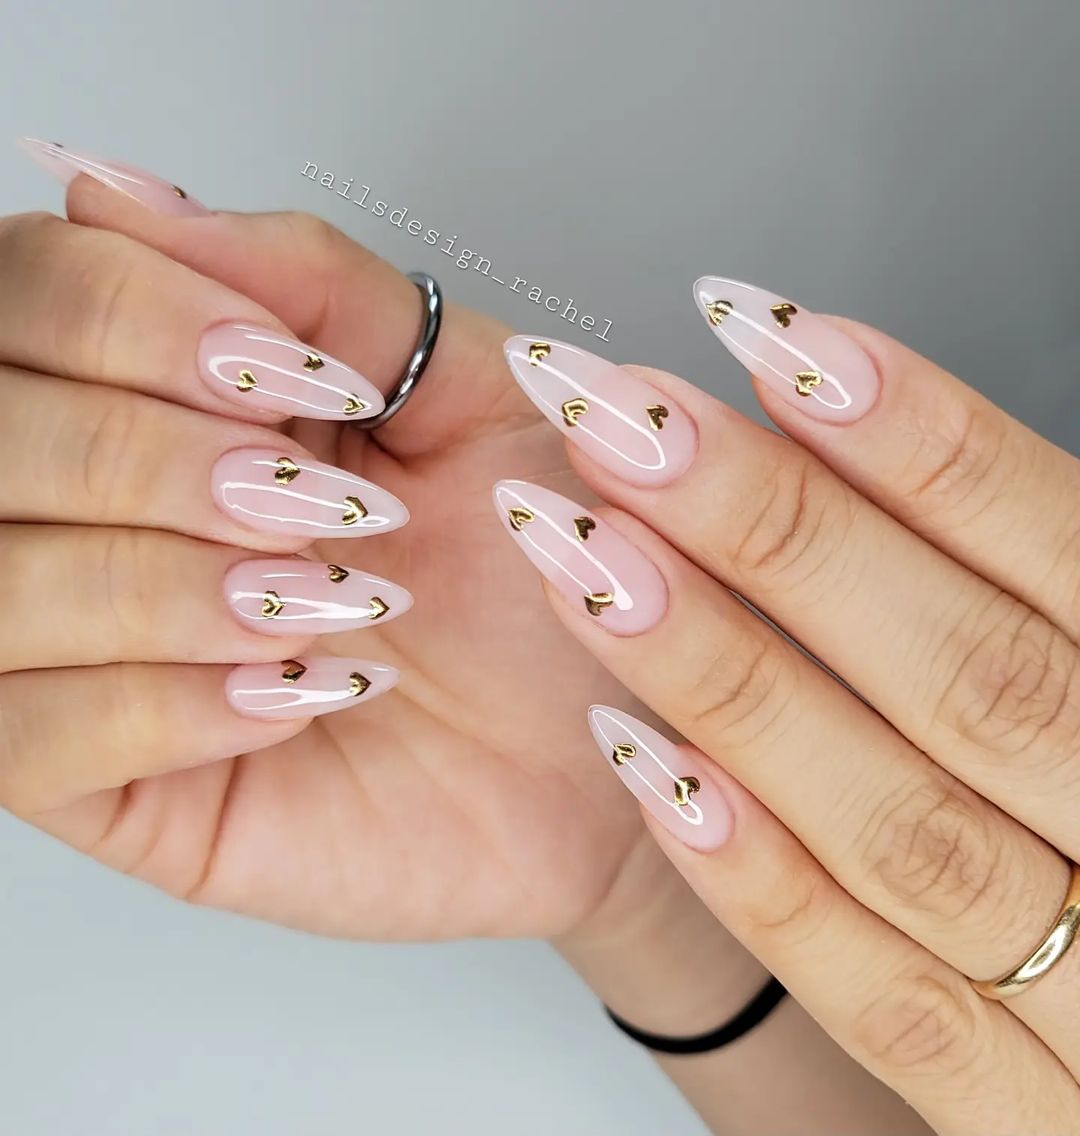 30 Pretty Gel X Nails You'll Want to Try